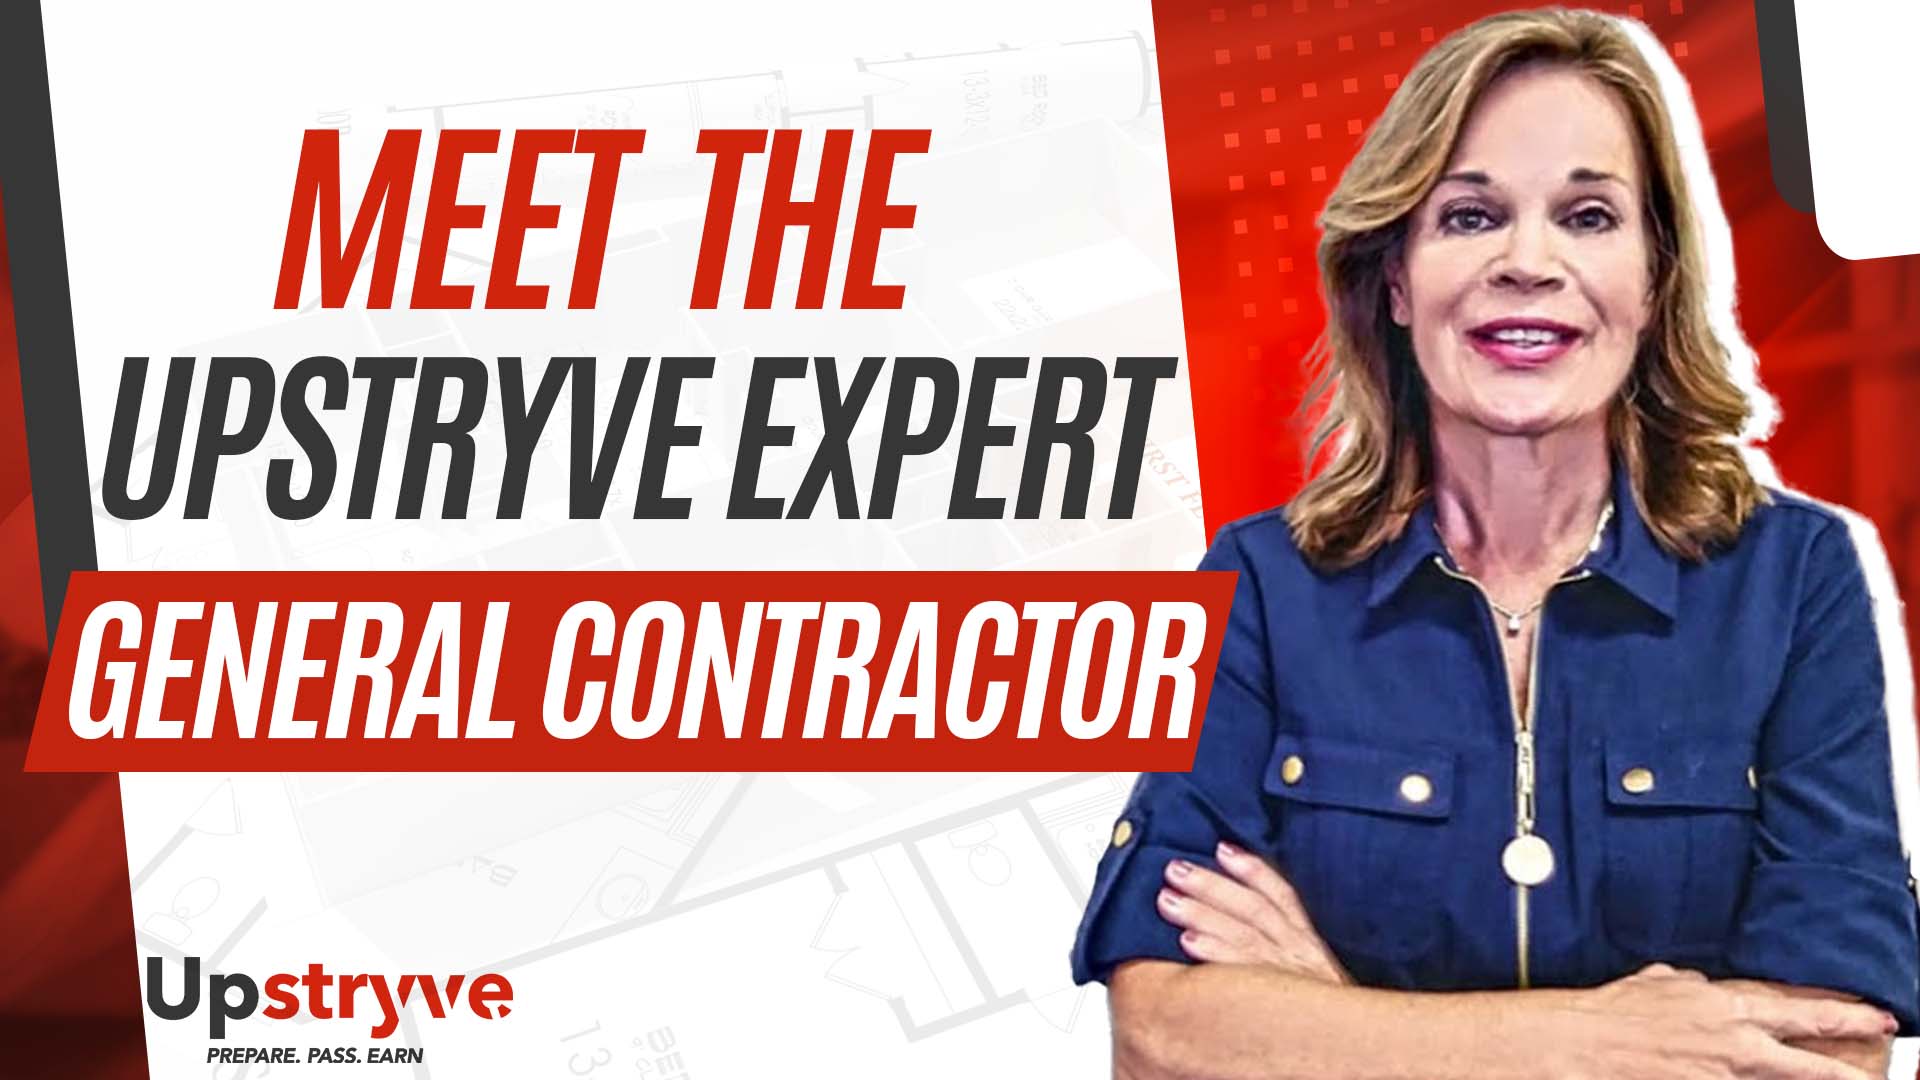 Meet one of Upstryve's experts Fay Bamond. Join her today and gain the knowledge you need to pass your trade exam. Fay Bamond has been a licensed Florida Building contractor since 2004. She has experience in the construction of new single-family as well as multi-family homes, commercial additions, and residential remodeling projects of all levels of complexity. She has extensive knowledge of the real estate market and its relationship to the construction industry having owned a mortgage firm, real estate brokerage, and title insurance company. Fay is a proud Florida native and holds a Bachelor of Science in Communications from Florida State University as well as a Minor in Education. She brings a unique, high-energy approach to teaching taking a personal interest in each of her students to ensure they receive the information they need to successfully pass their exams and are prepared to enter the next stage of their professional lives.

EXPERIENCE:
20 years of experience in the field and 5 years of tutoring

EDUCATION:
B.S. in Mass Communications
Florida Certified Building Contractor
Florida Real Estate Broker Associate 

TUTORING LANGUAGE: 
English

Need more help with your trade exam prep? Click here and match with one of our experts 👉 https://upstryve.com/

Interested in becoming a tutor? Join the team 👉 https://upstryve.com/pages/how-to-become-a-tutor

Subscribe to our channel: http://bit.ly/UpStryveYouTubeChannel
Join us on Facebook: https://www.facebook.com/upstryveinc
Follow us on Instagram : https://www.instagram.com/upstryve

Upstryve connects the future tradespeople of America with industry experts for a personalized 1 on 1 tutoring experience. Get the expert guidance you need to pass your trade exam and get your license. Our instructors specialize in exam preparation for general contractor, electrical contractor, plumbing contractor, HVAC and more. Prepare, Pass and Earn with Upstryve.

#Upstryve #BuildingContractor #Contractor